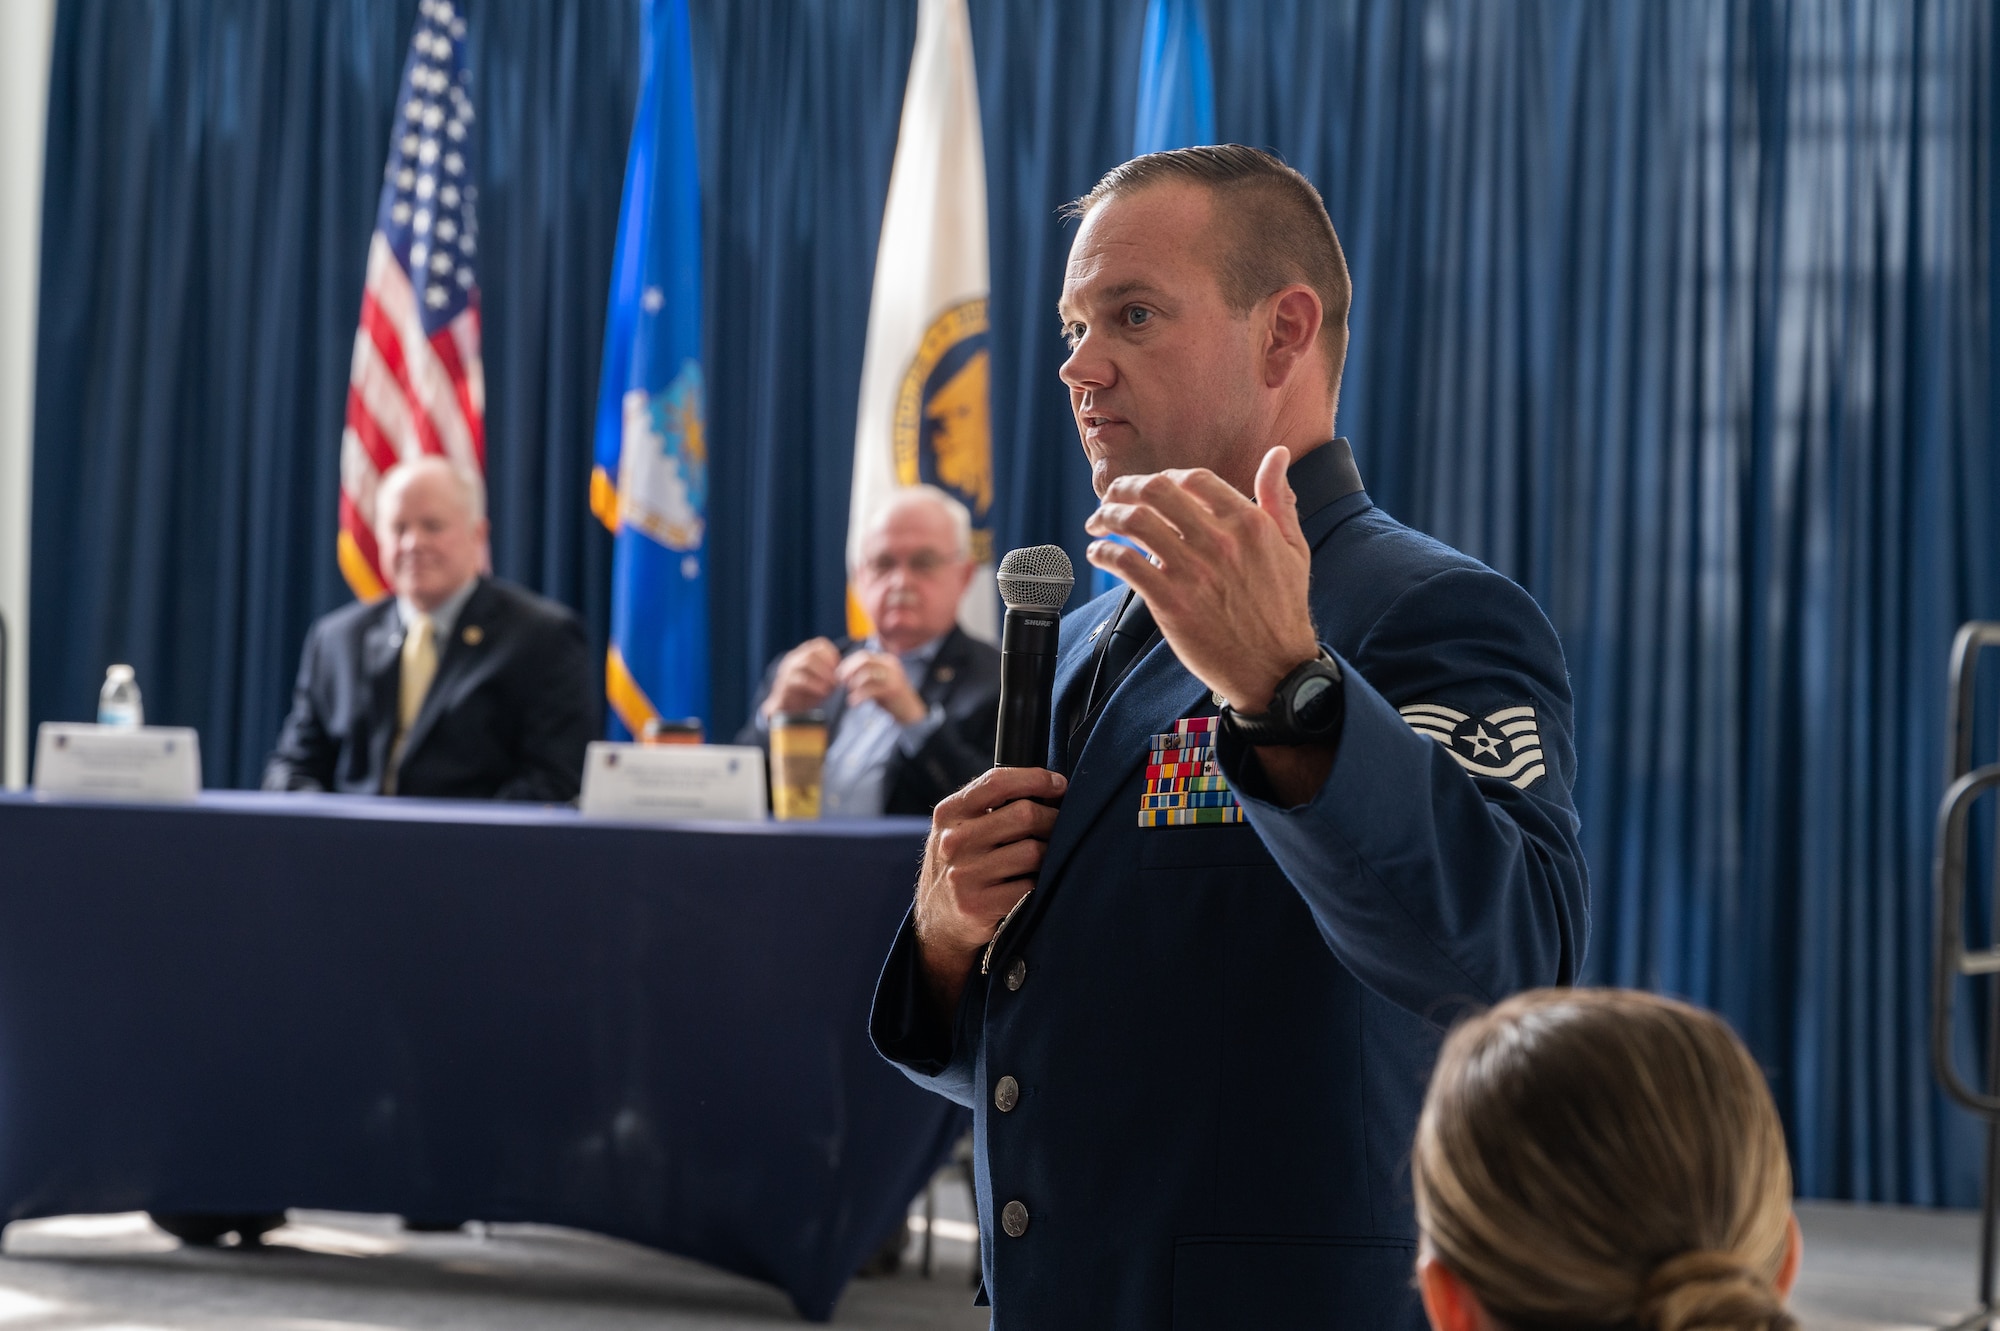 U.S. Air Force Tech Sgt. Brett A. Yoakum, of the 164th Airlift Wing, Tennessee National Guard, answers a question from the crowd during a panel of former Air National Guard (ANG) senior enlisted leaders after the Outstanding Airmen of the Year ceremony at Joint Base Andrews, Maryland, on Aug. 25, 2022.